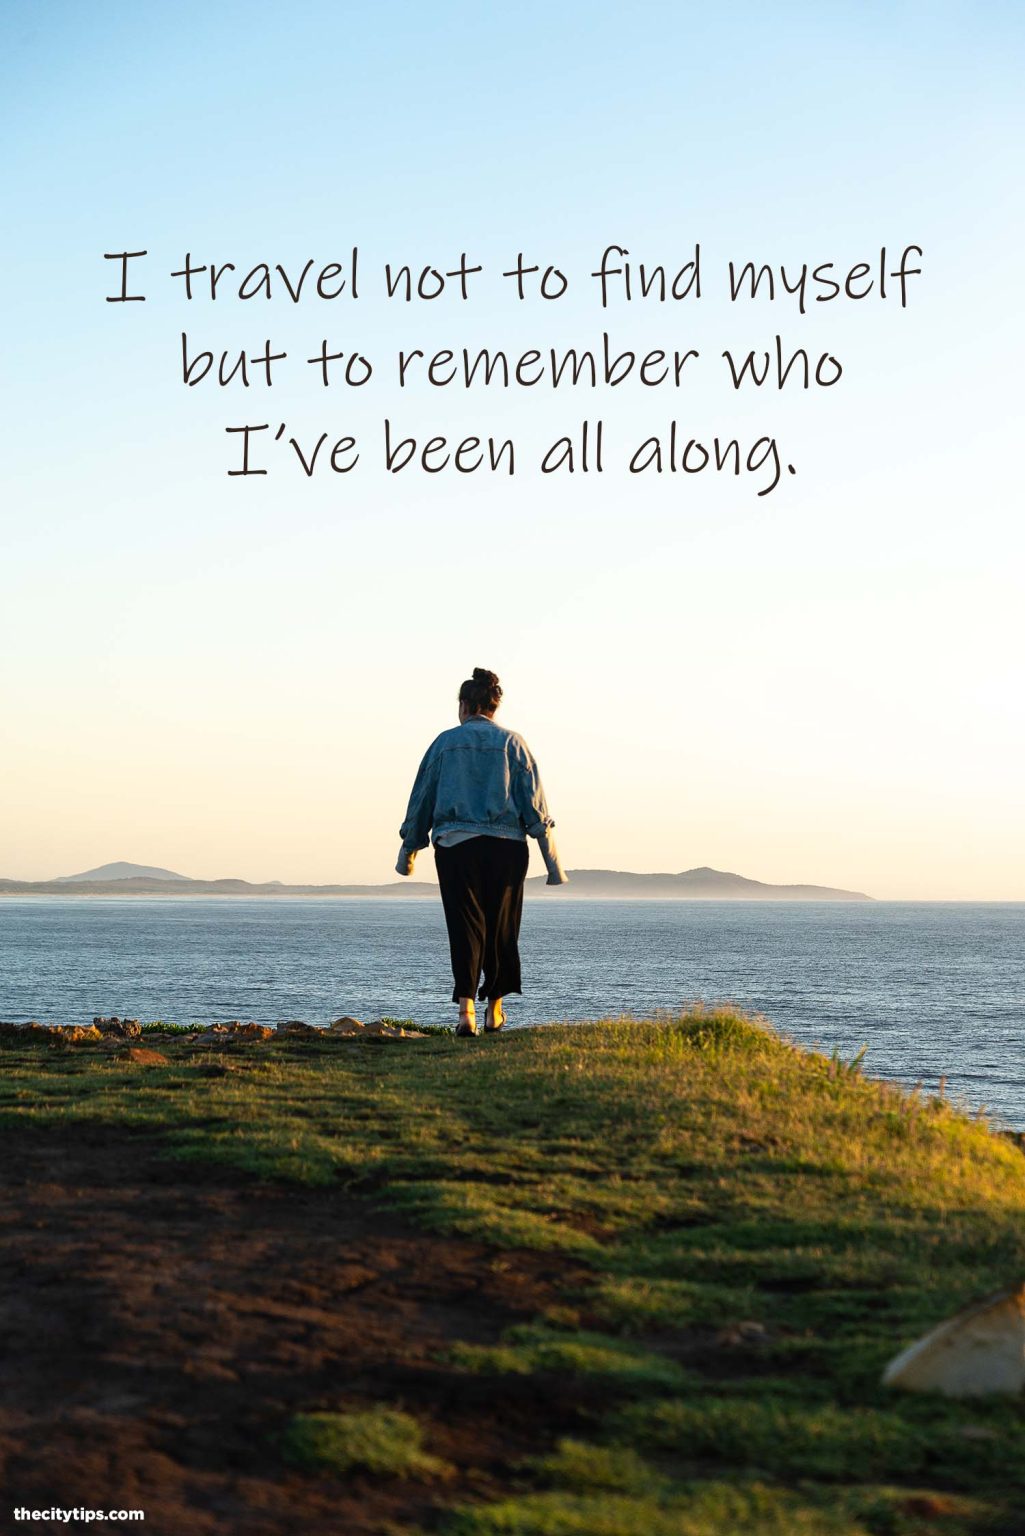 85+ of the Best Travel Quotes in the World (With Images) - City Tips